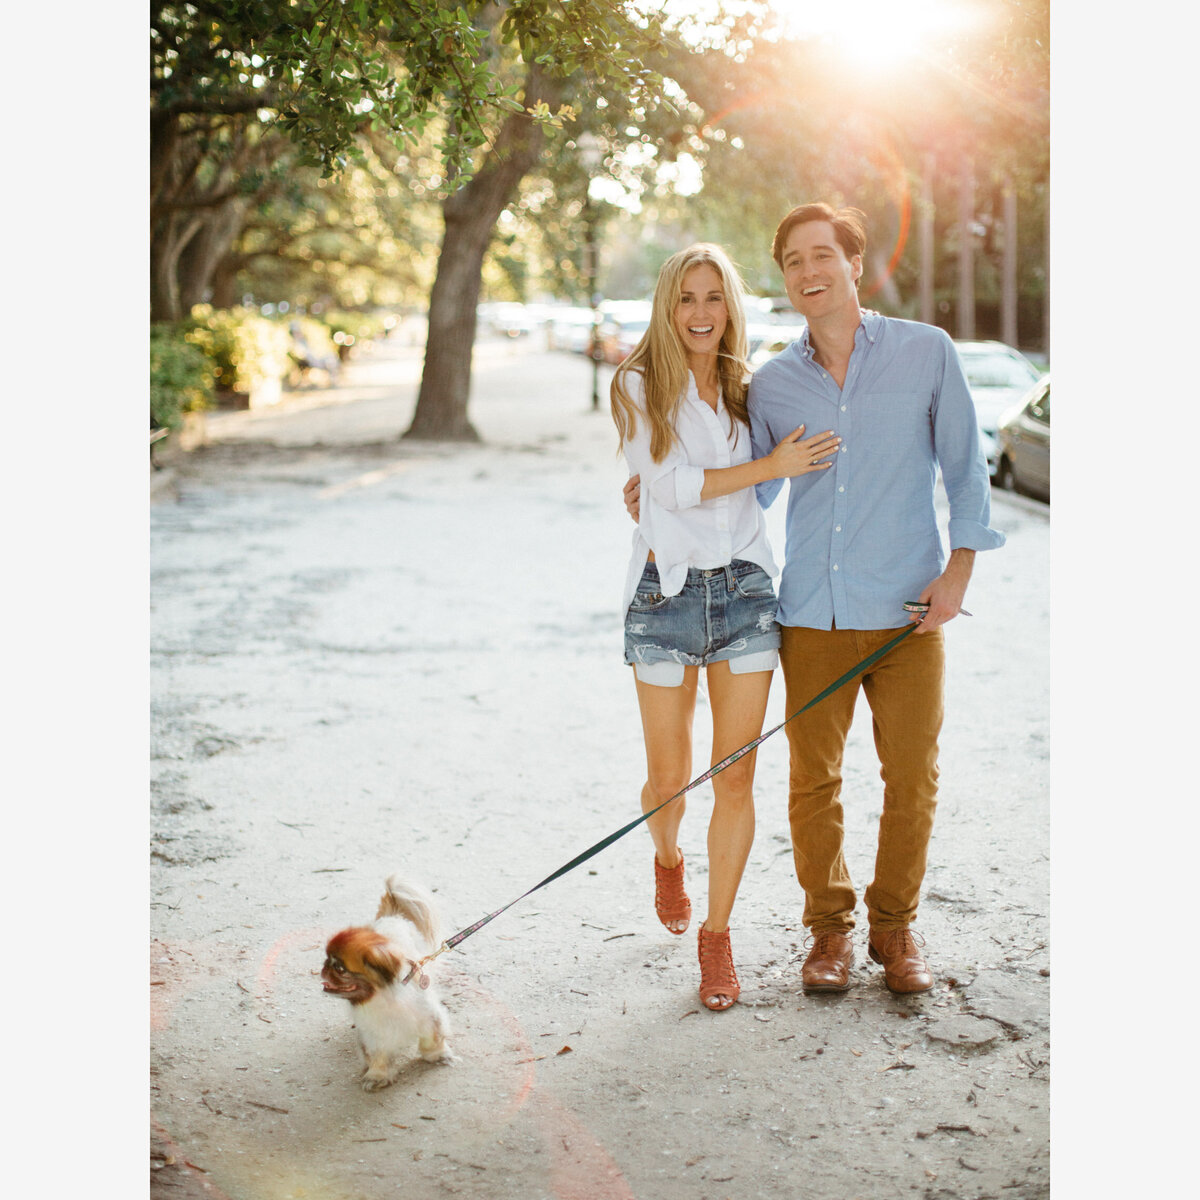 historic-downtown-charleston-engagement-photos--by-philip-casey-024